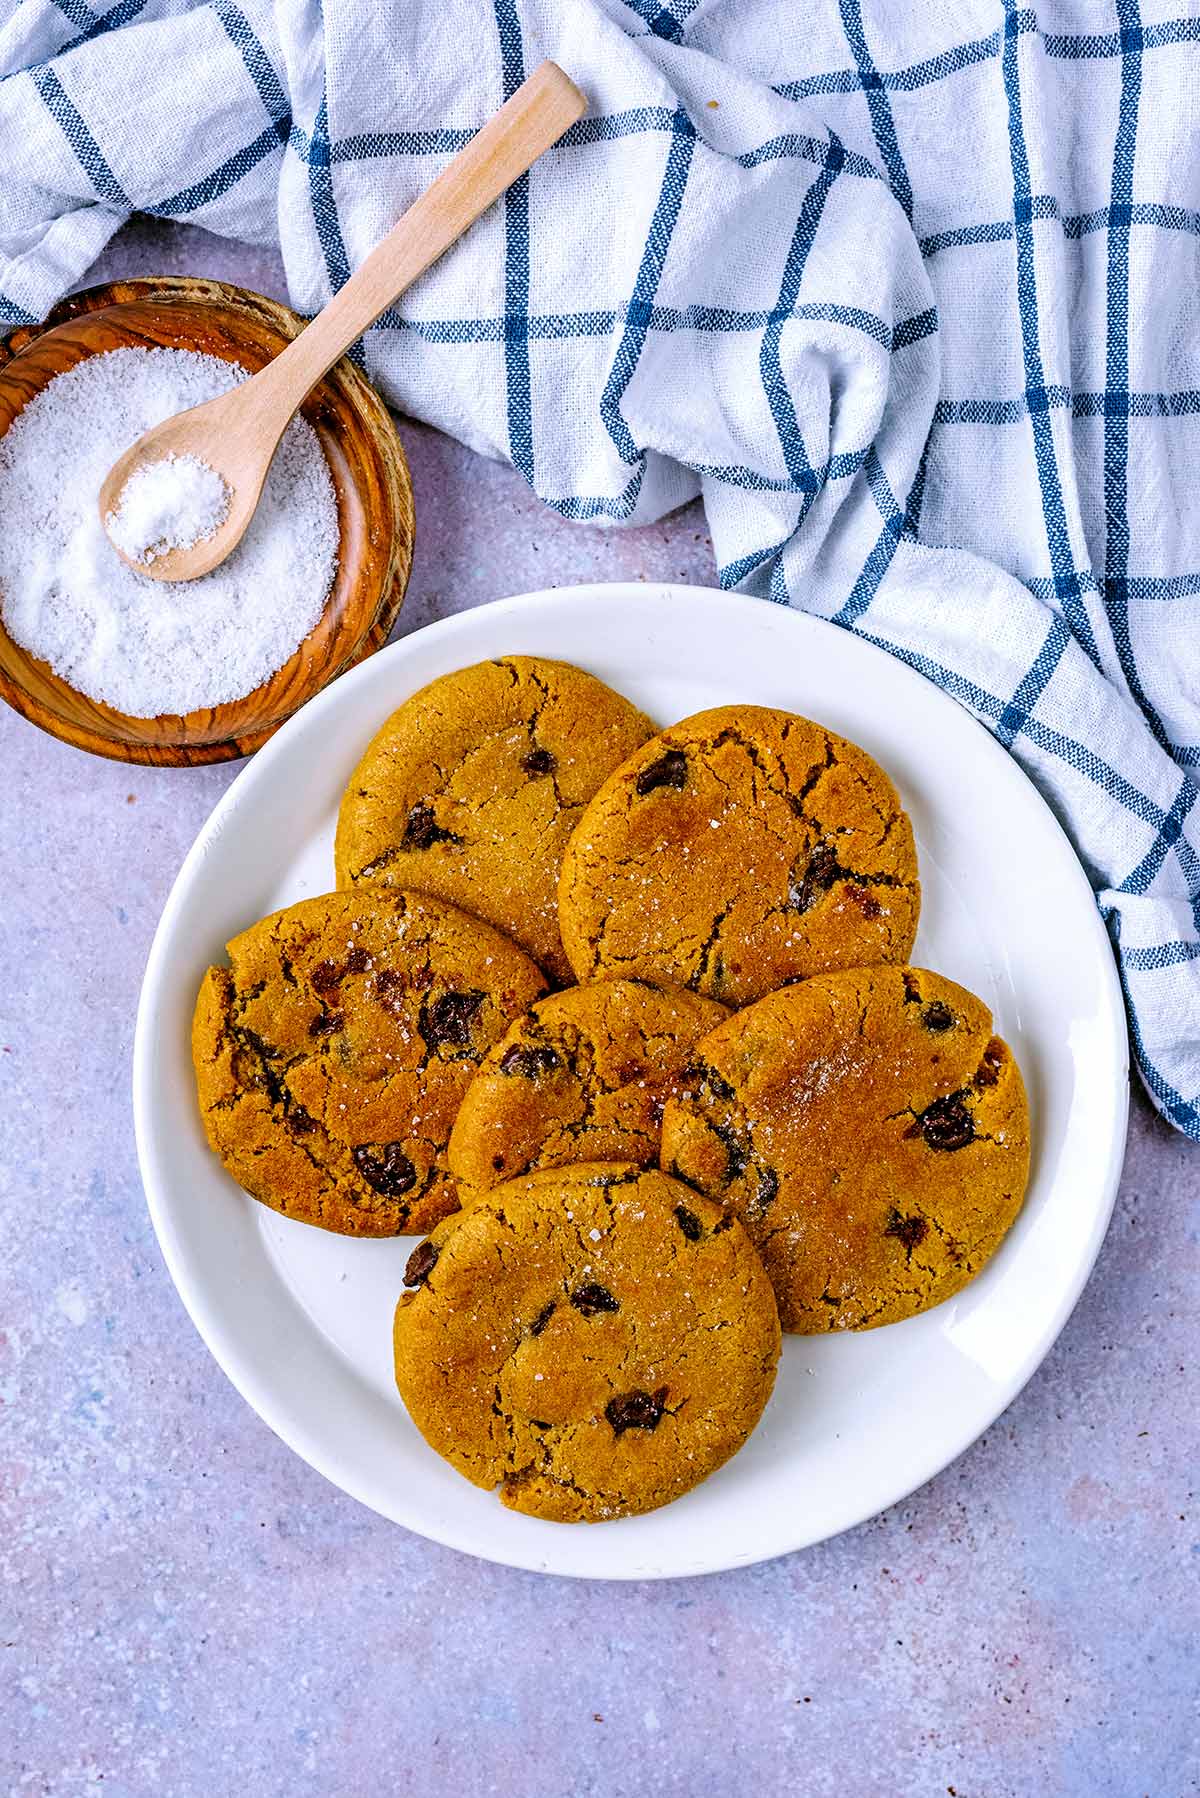 Six chocolate chip cookies on a plate next to a towel and dish of salt.